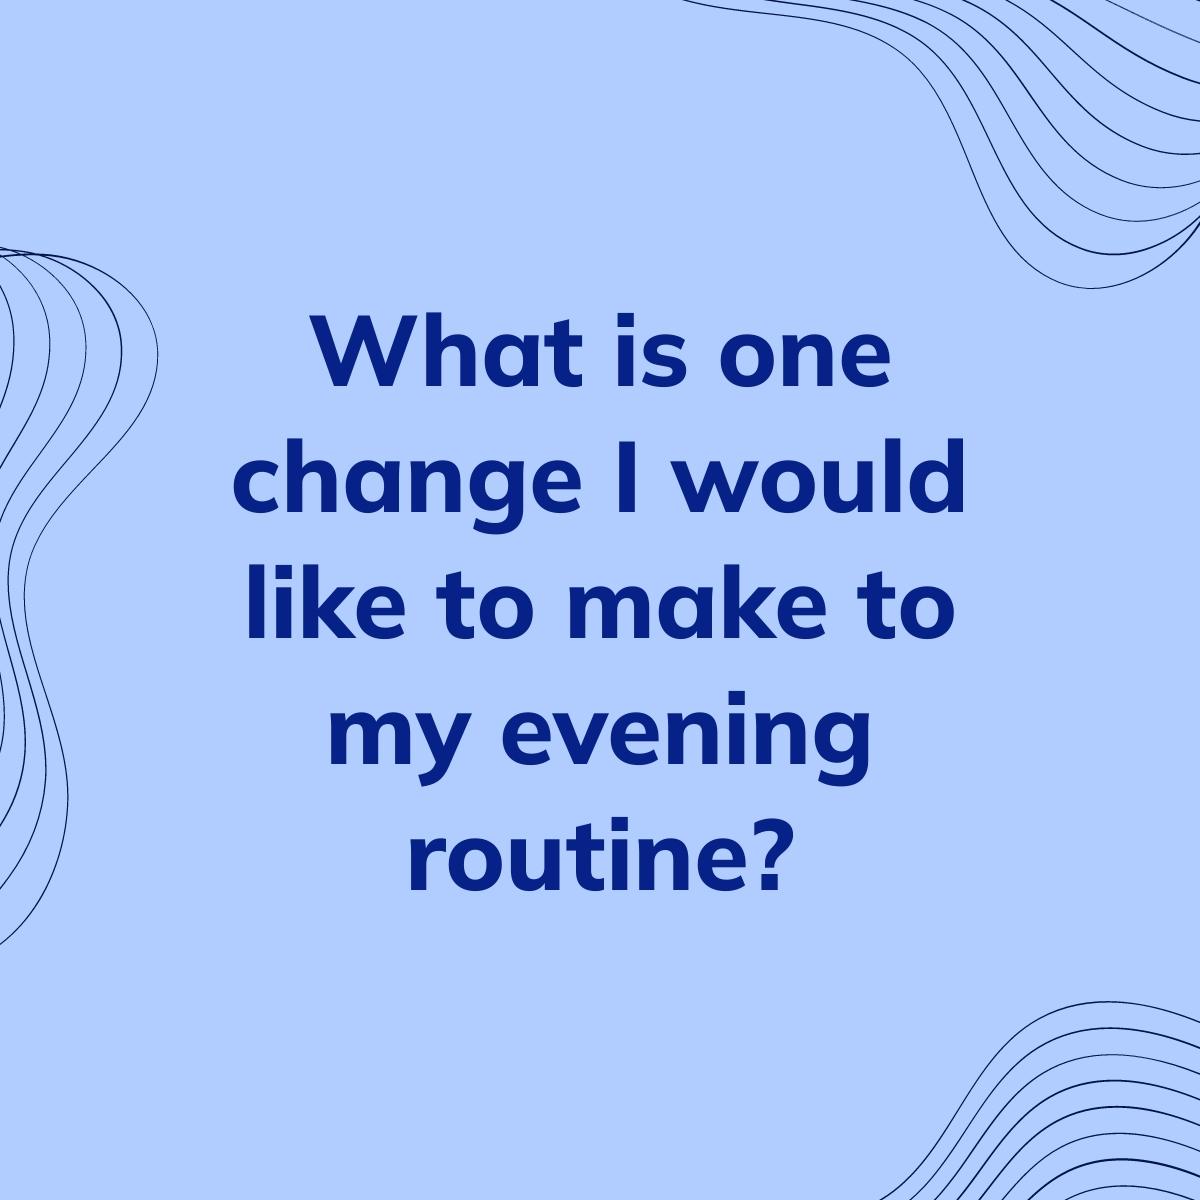 Journal Prompt: What is one change I would like to make to my evening routine?